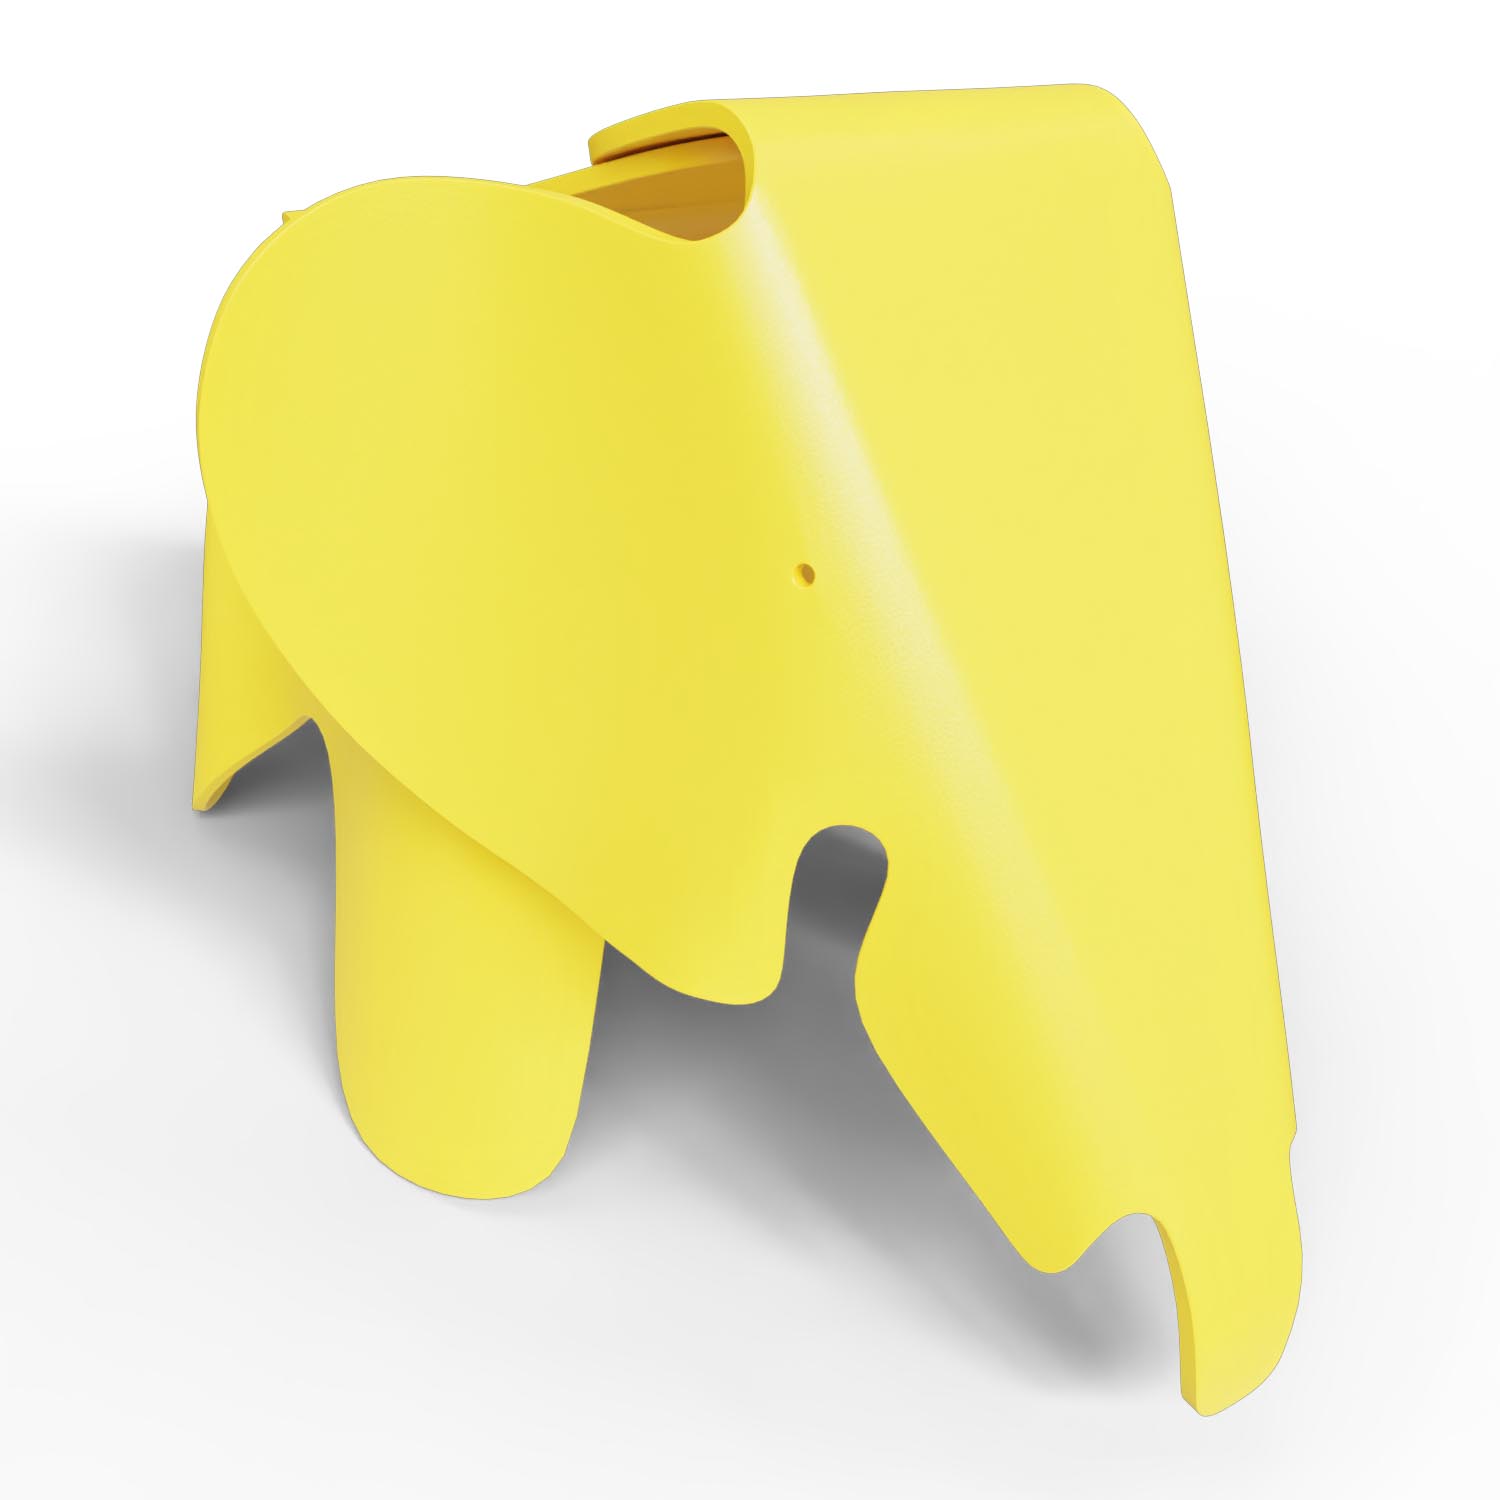 Eames Elephant (small) Butterblume 21511209